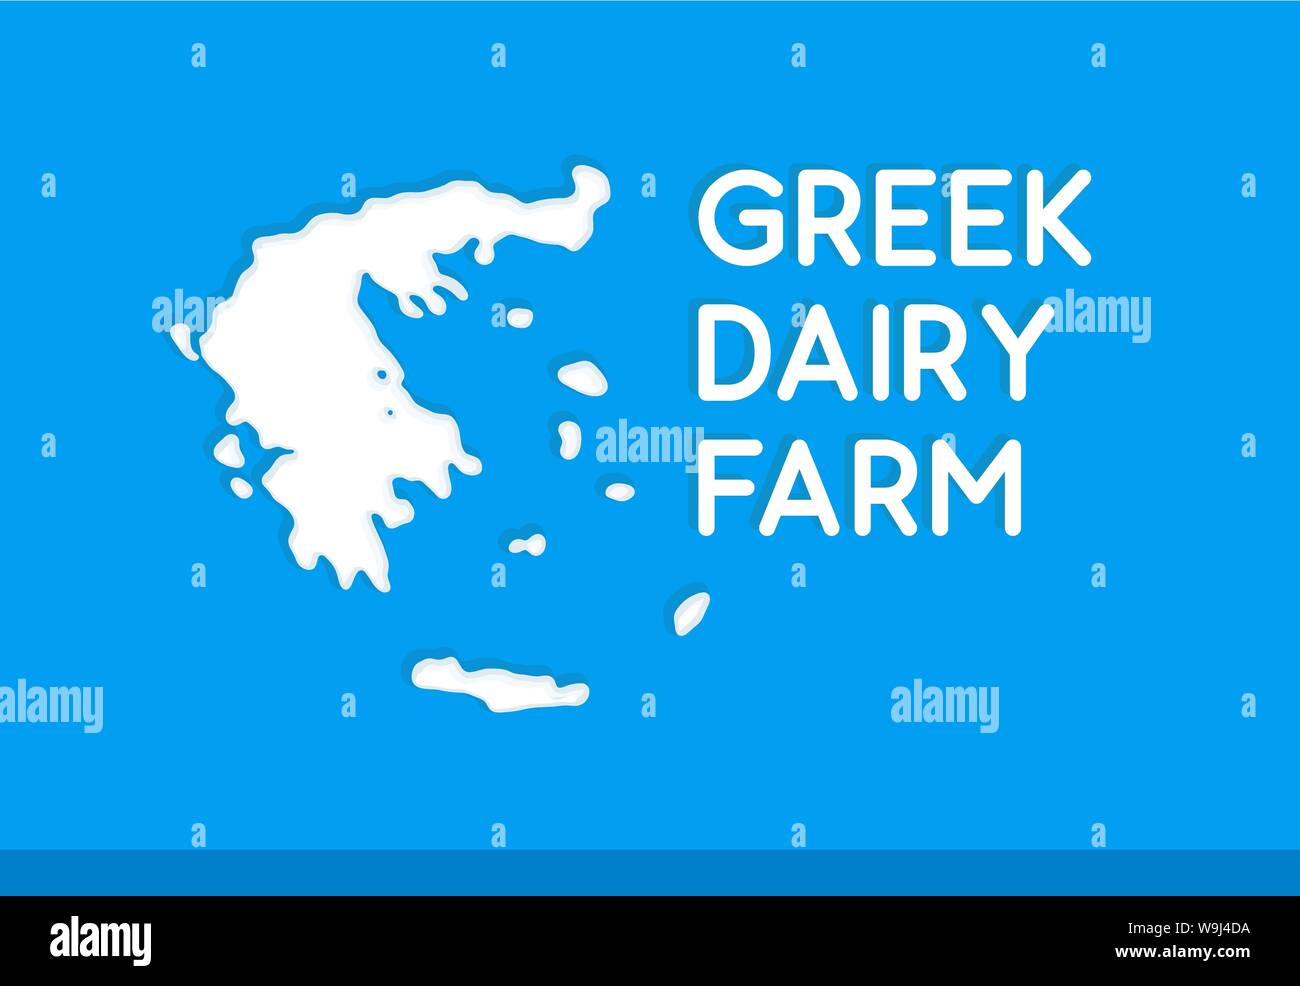 Greek Dairy Farm, Vector concept illustration with silhouette of Greece map painted by milk on national blue color. Stock Vector